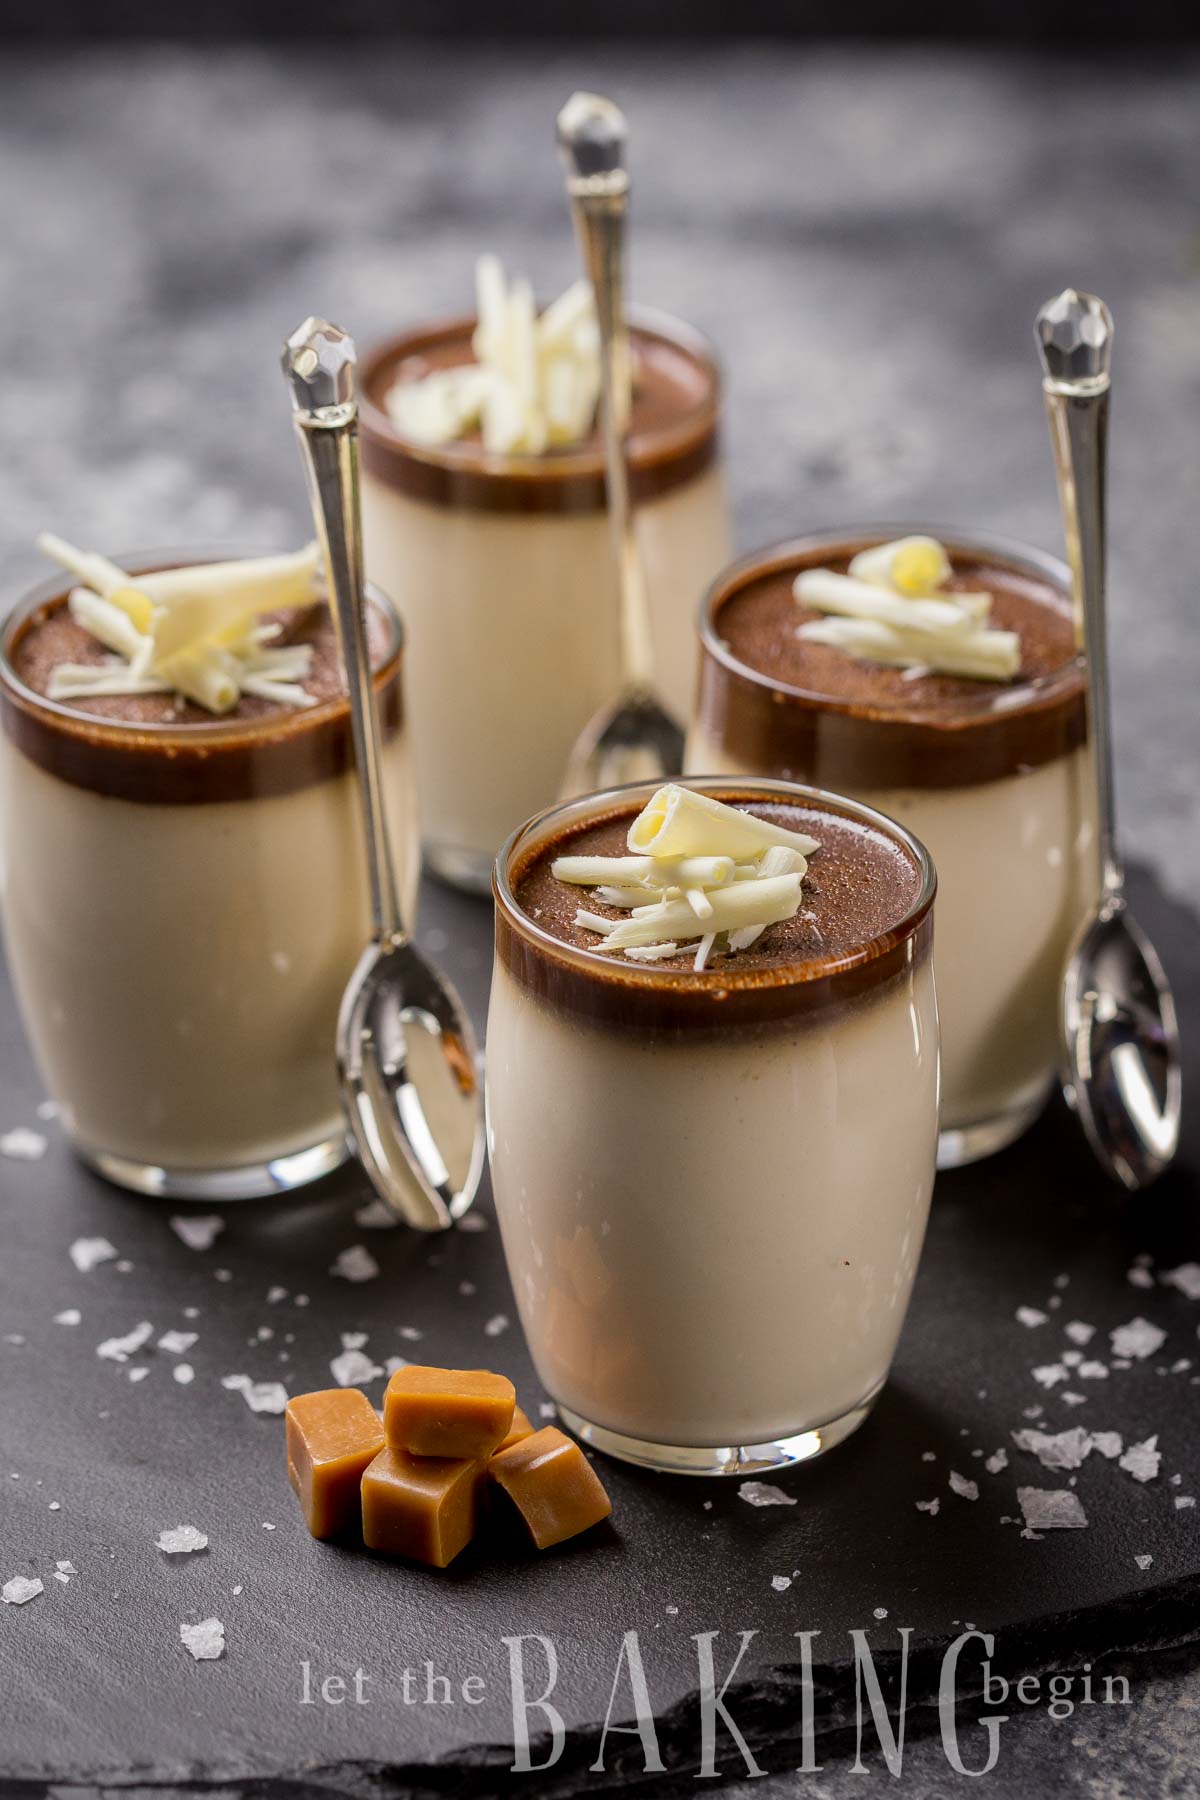 Salted Caramel Coffee Mousse Cups - Super quick dessert cups made of Salted Caramel Milk mousse and a Coffee Chocolate layer. In 20 minutes or less you can be enjoying these yourself!